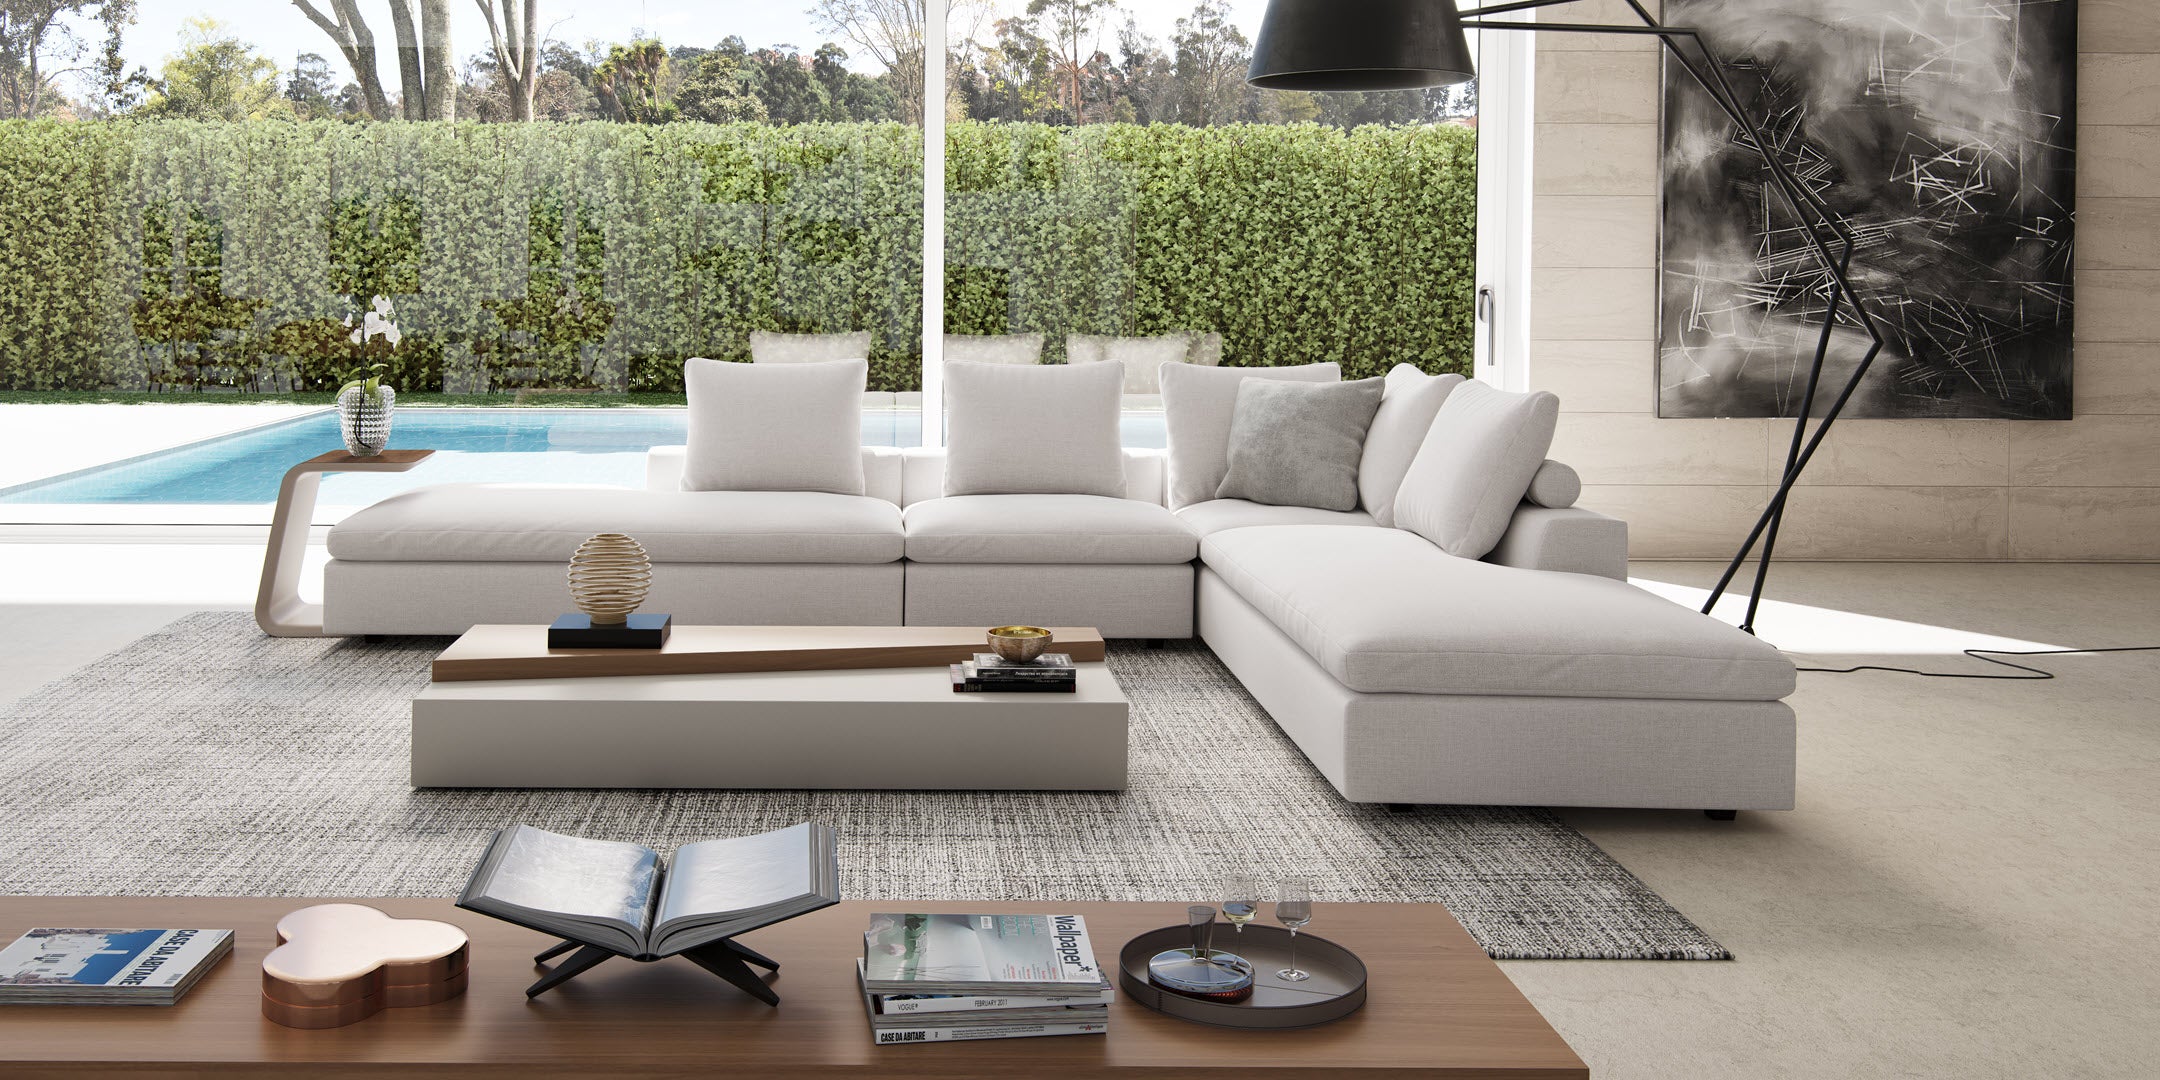 Build your own Modular Sofa at Modloft. Build in minutes, ships in days.